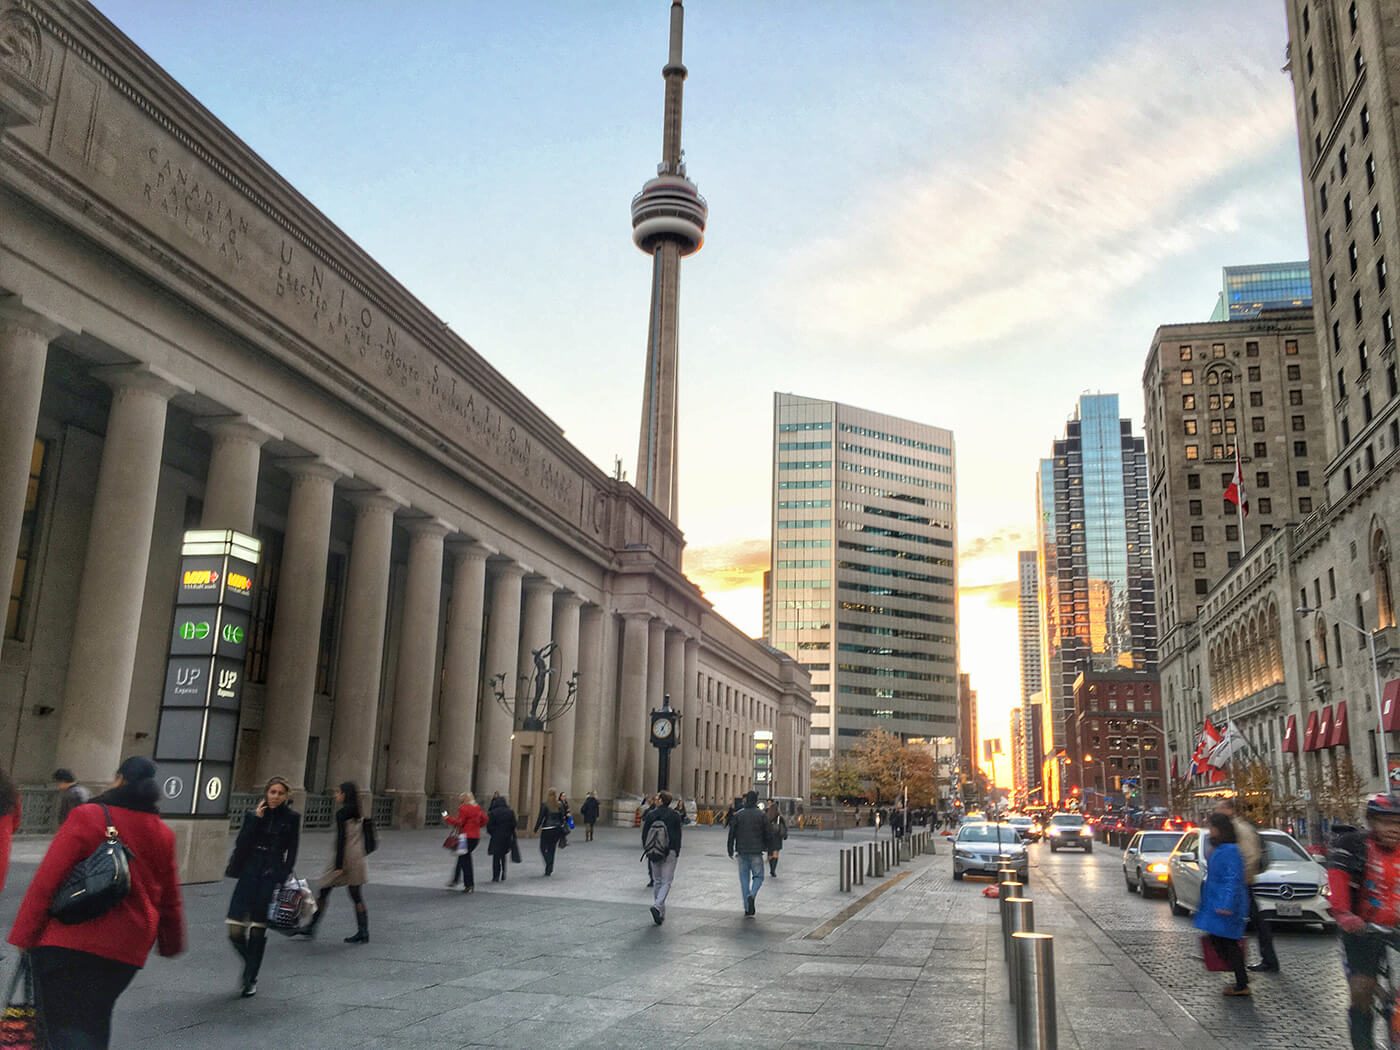 Our Weekend Adventure in Toronto